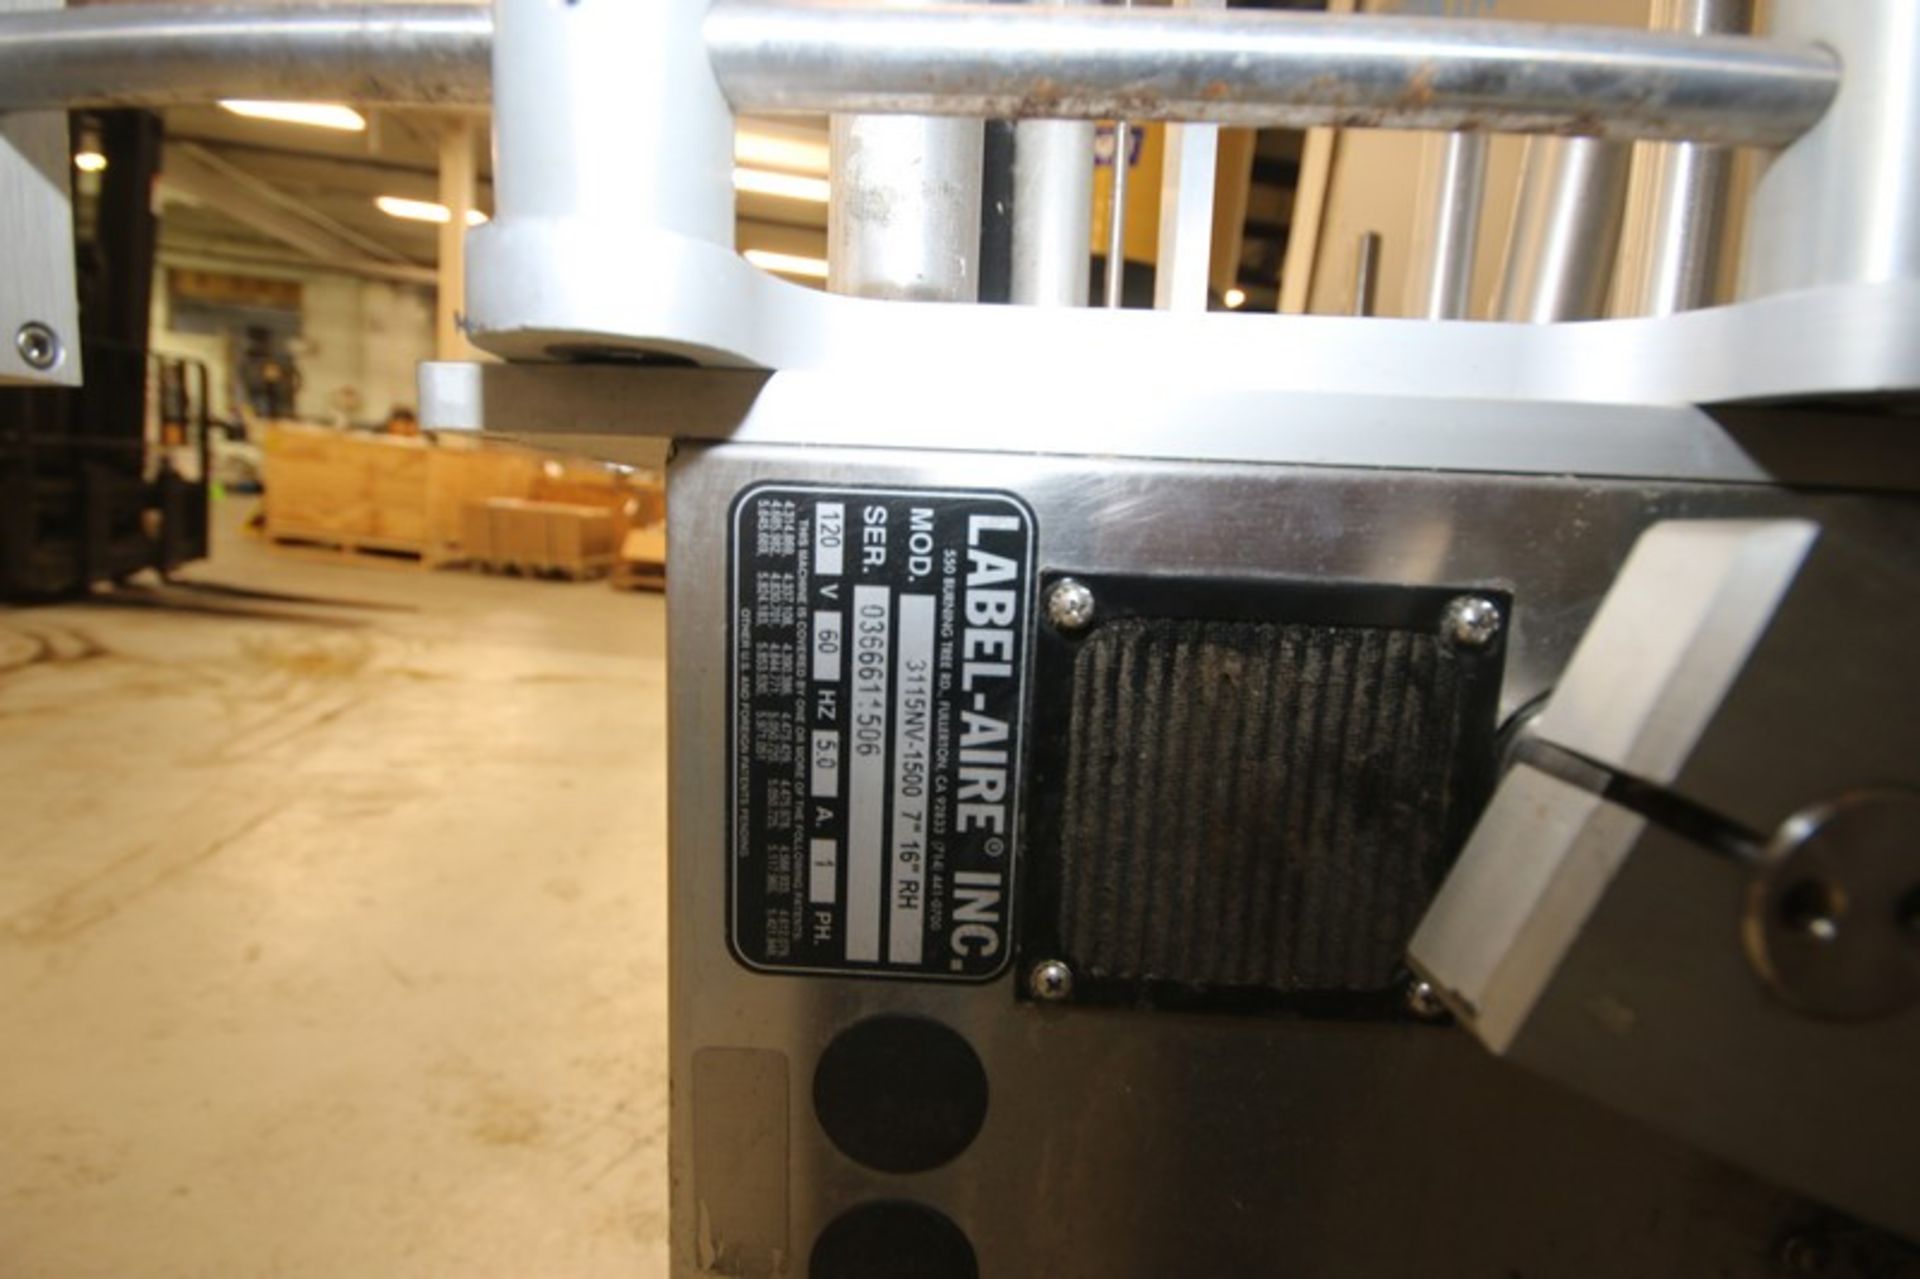 Label-Aire Inc. Labeler,M/N 3115NV-1500 7" 16" RH, S/N 0366611506, 120 Volts, 1 Phase, Mounted on - Image 6 of 6